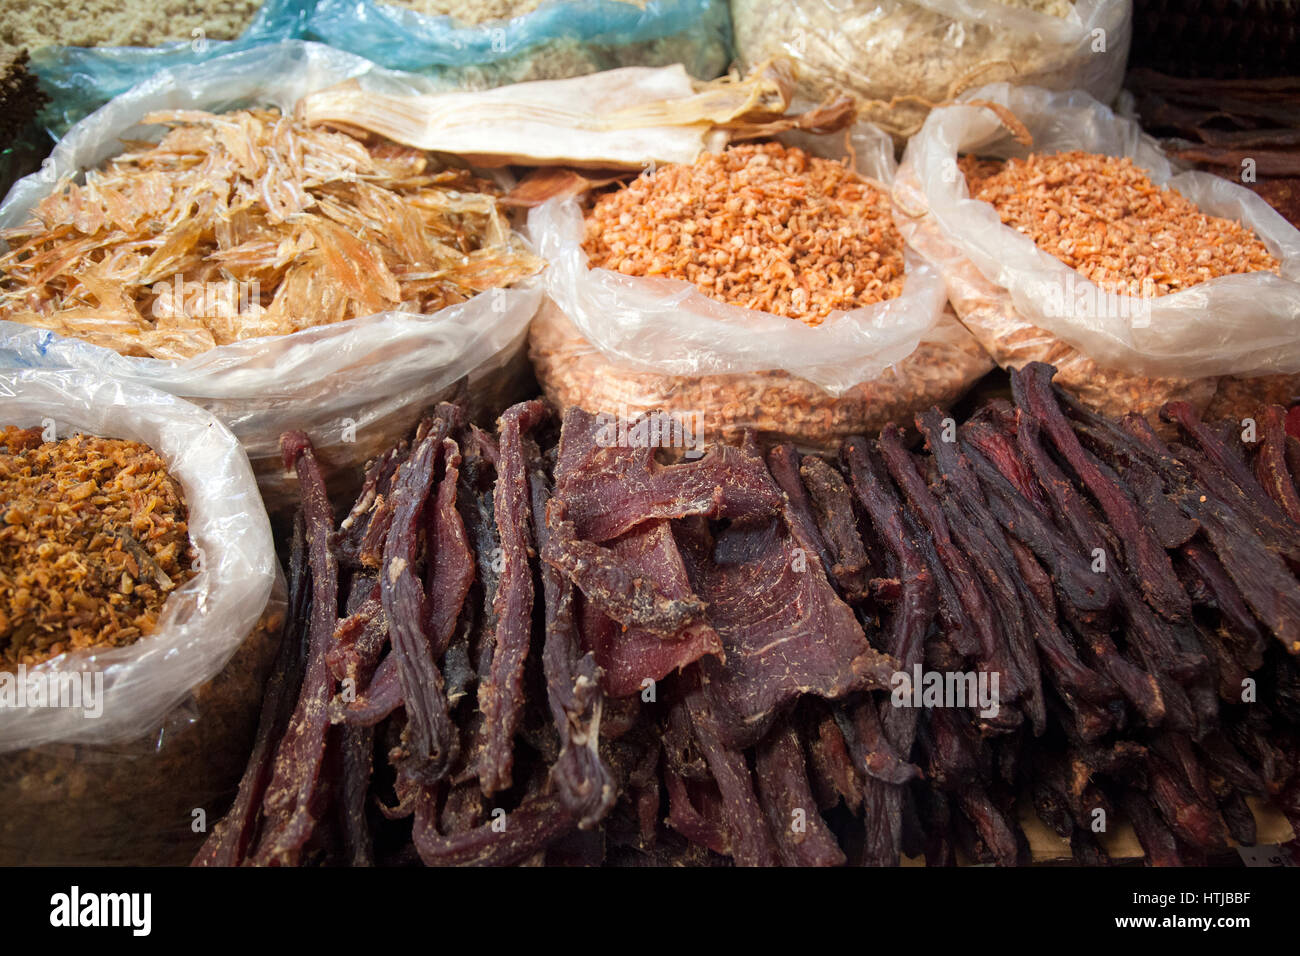 Dried Fish and Meats at Psa Leu Market in Siem Reap - Cambodia Stock Photo